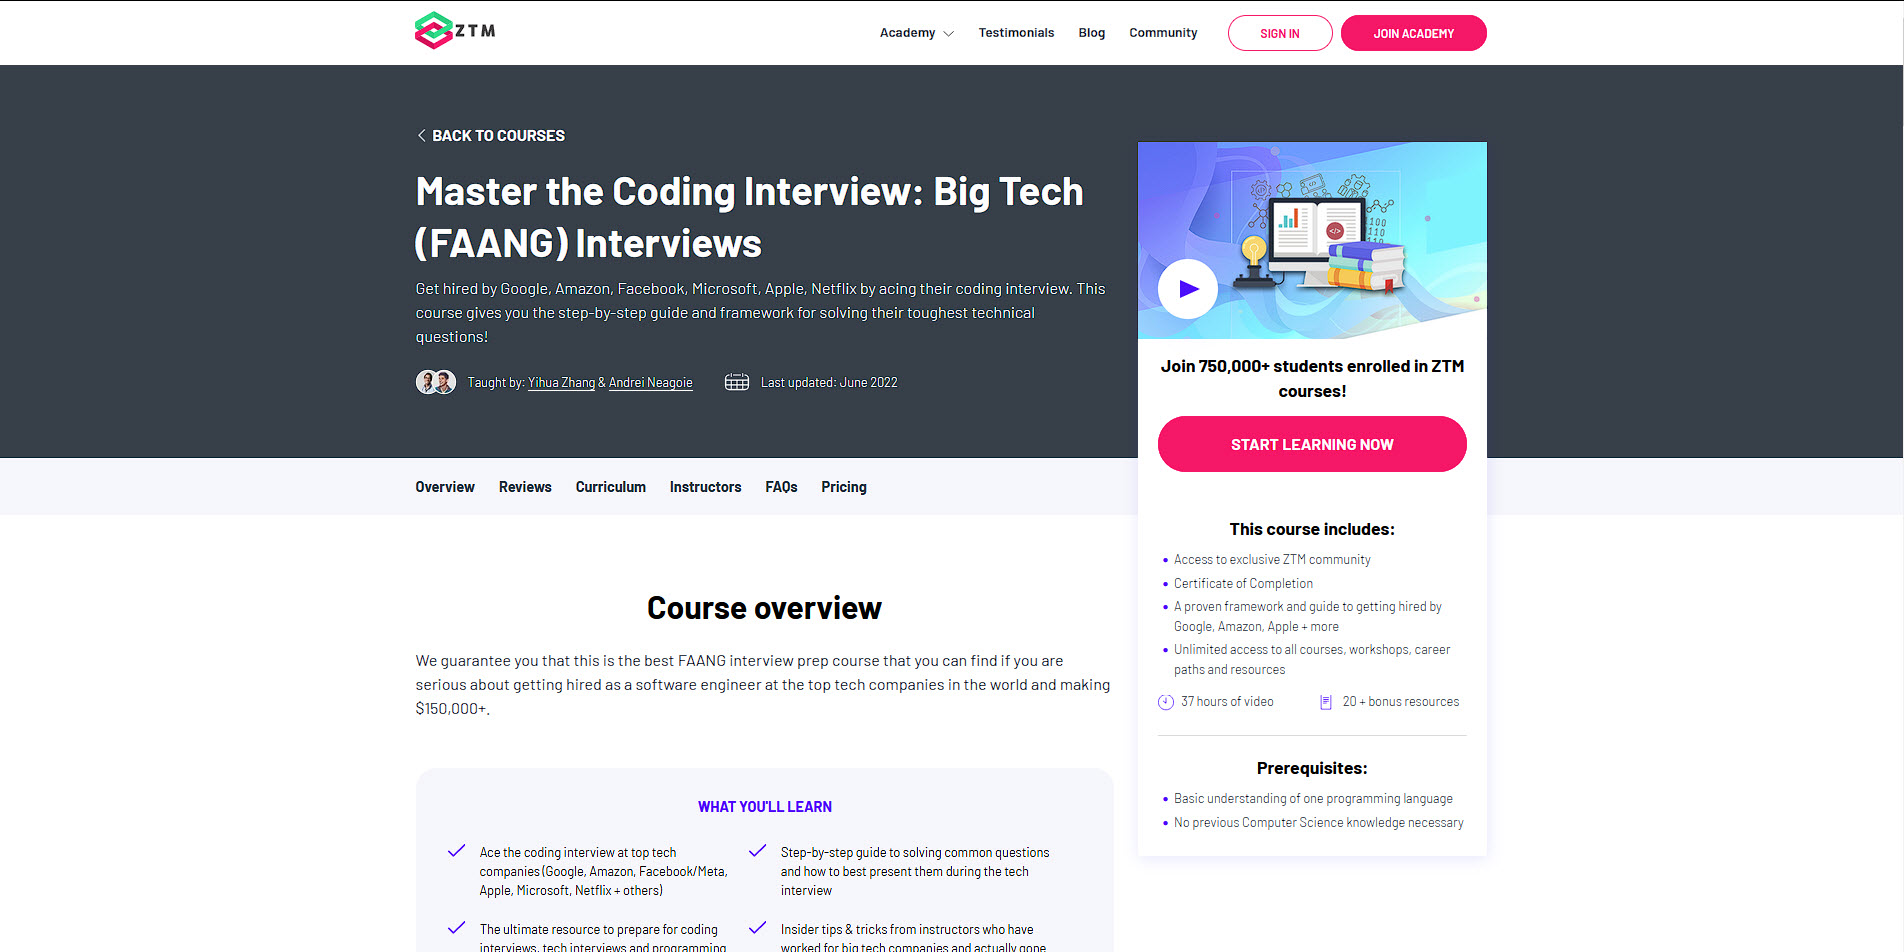 Master the coding interview and get hired by big tech